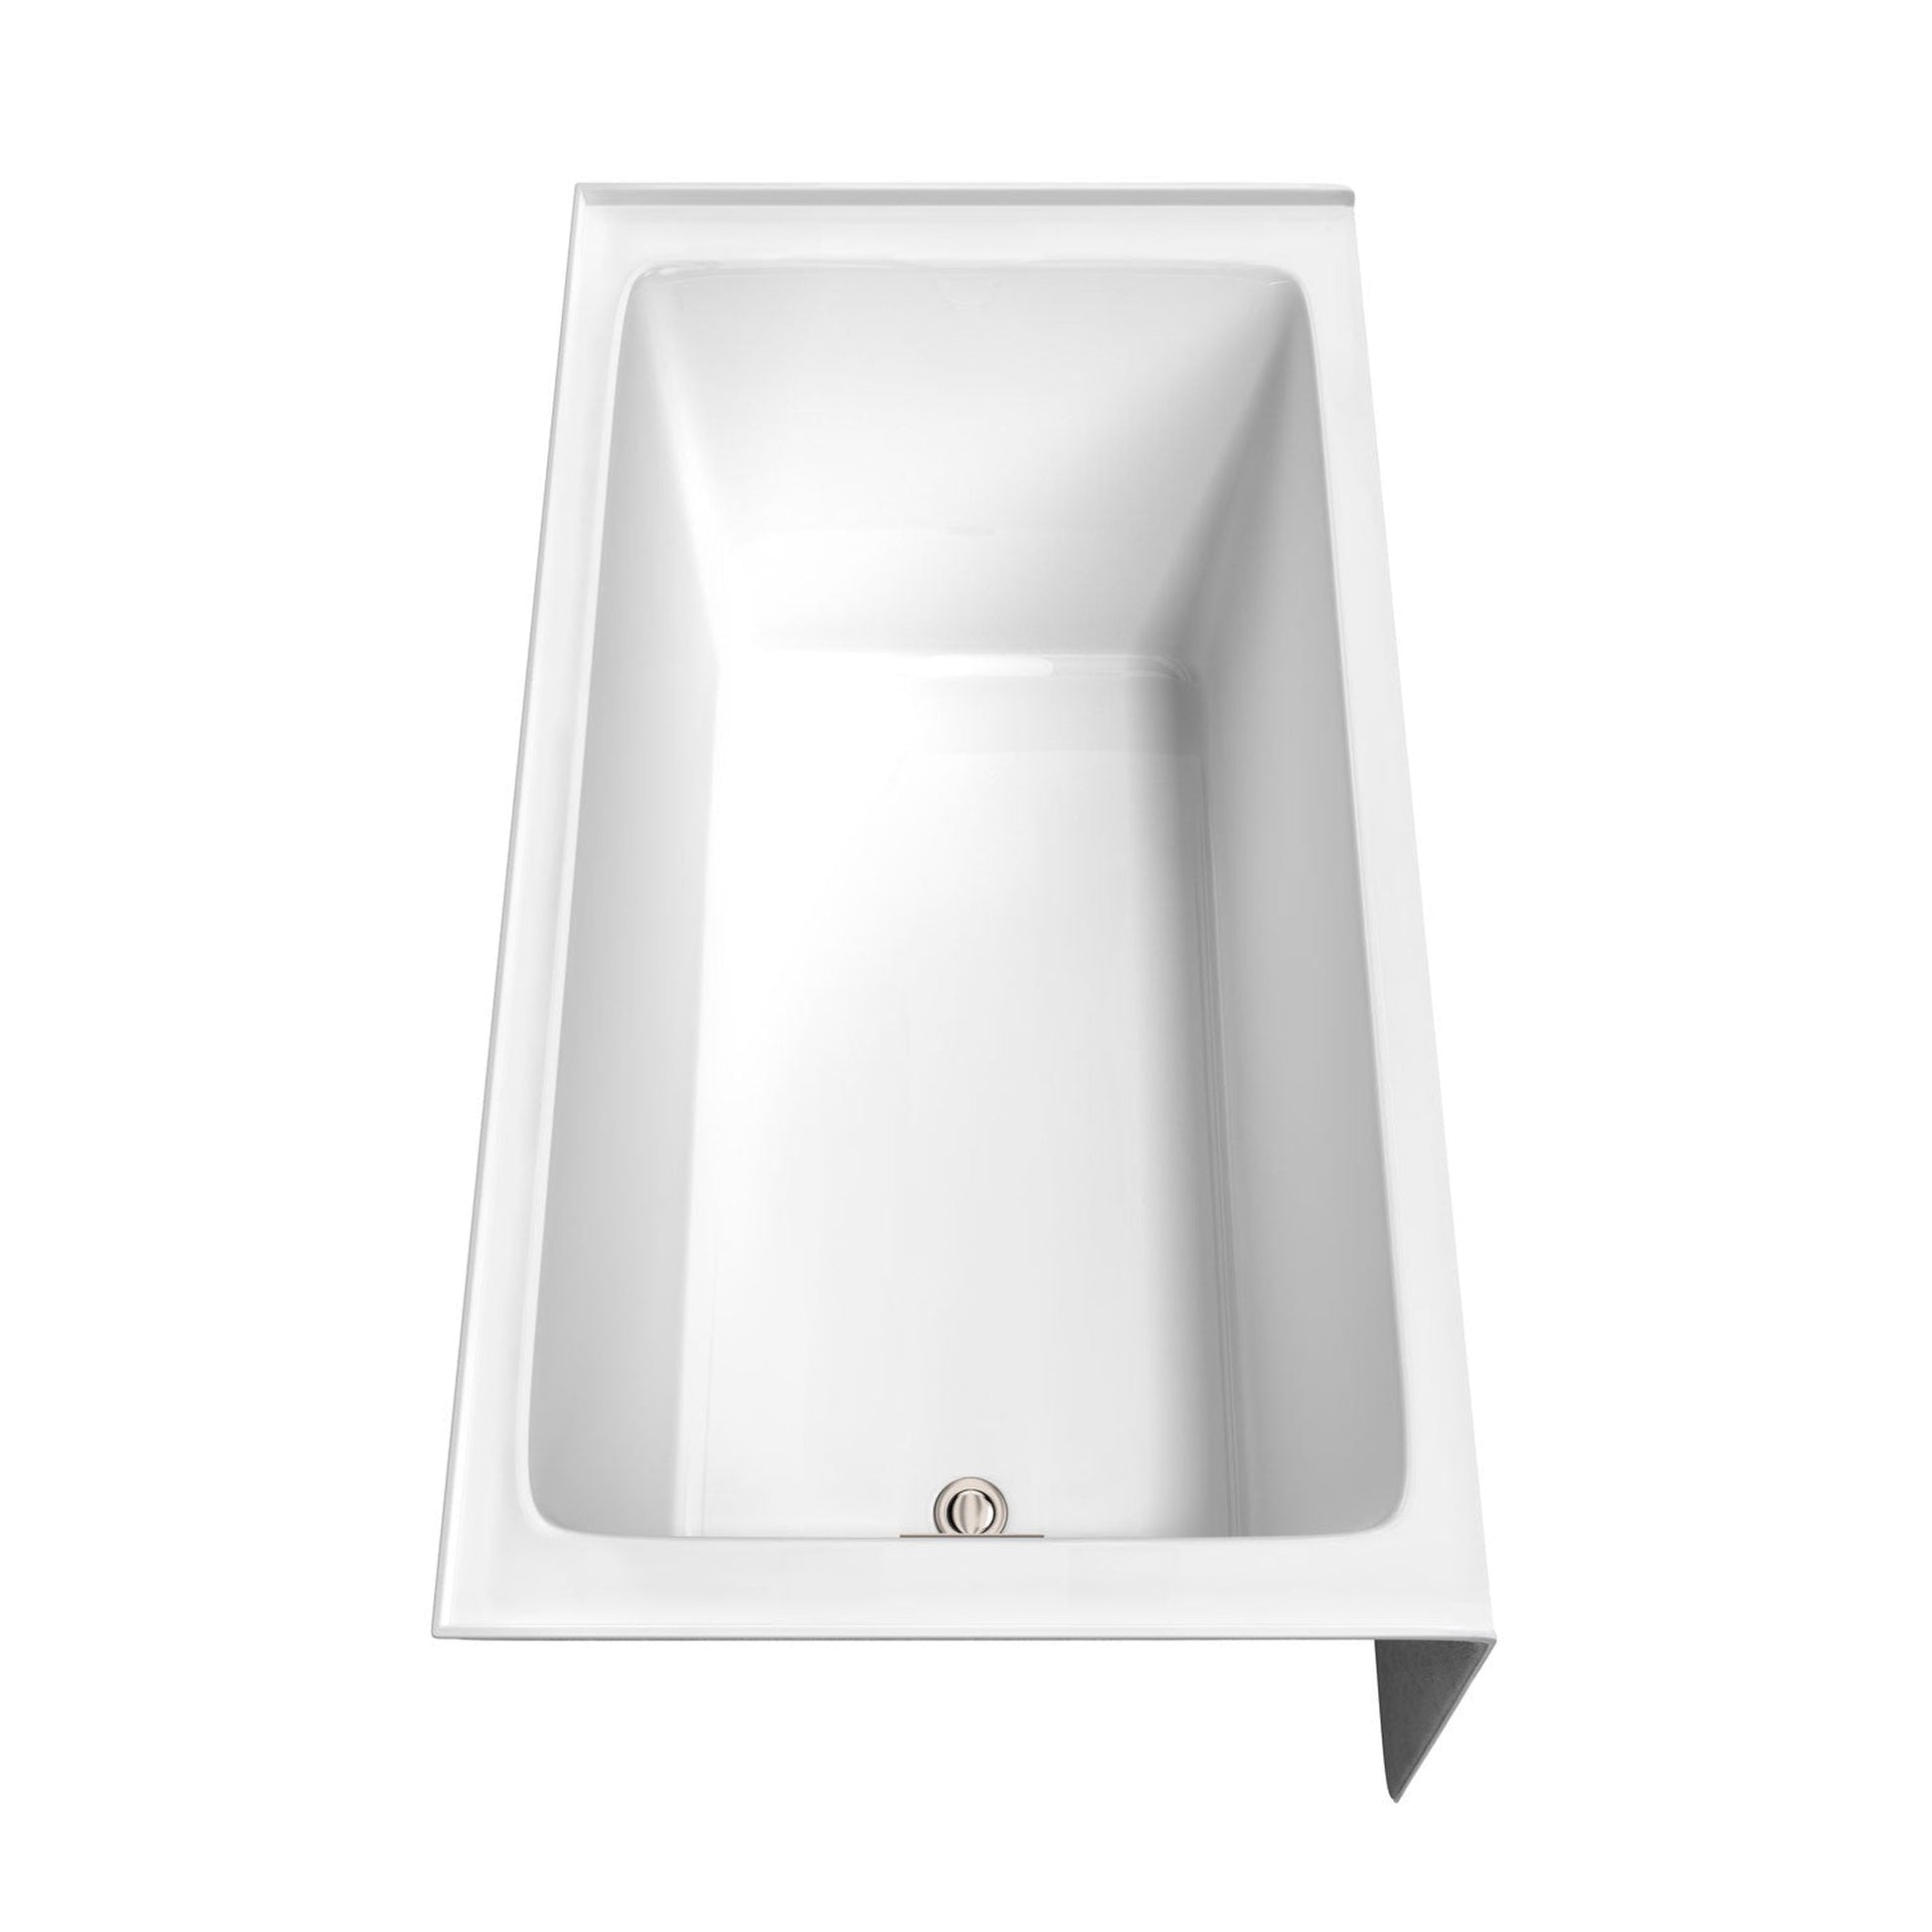 Wyndham Collection Grayley 60" x 32" Alcove Bathtub in White With Left-Hand Drain and Overflow Trim in Brushed Nickel